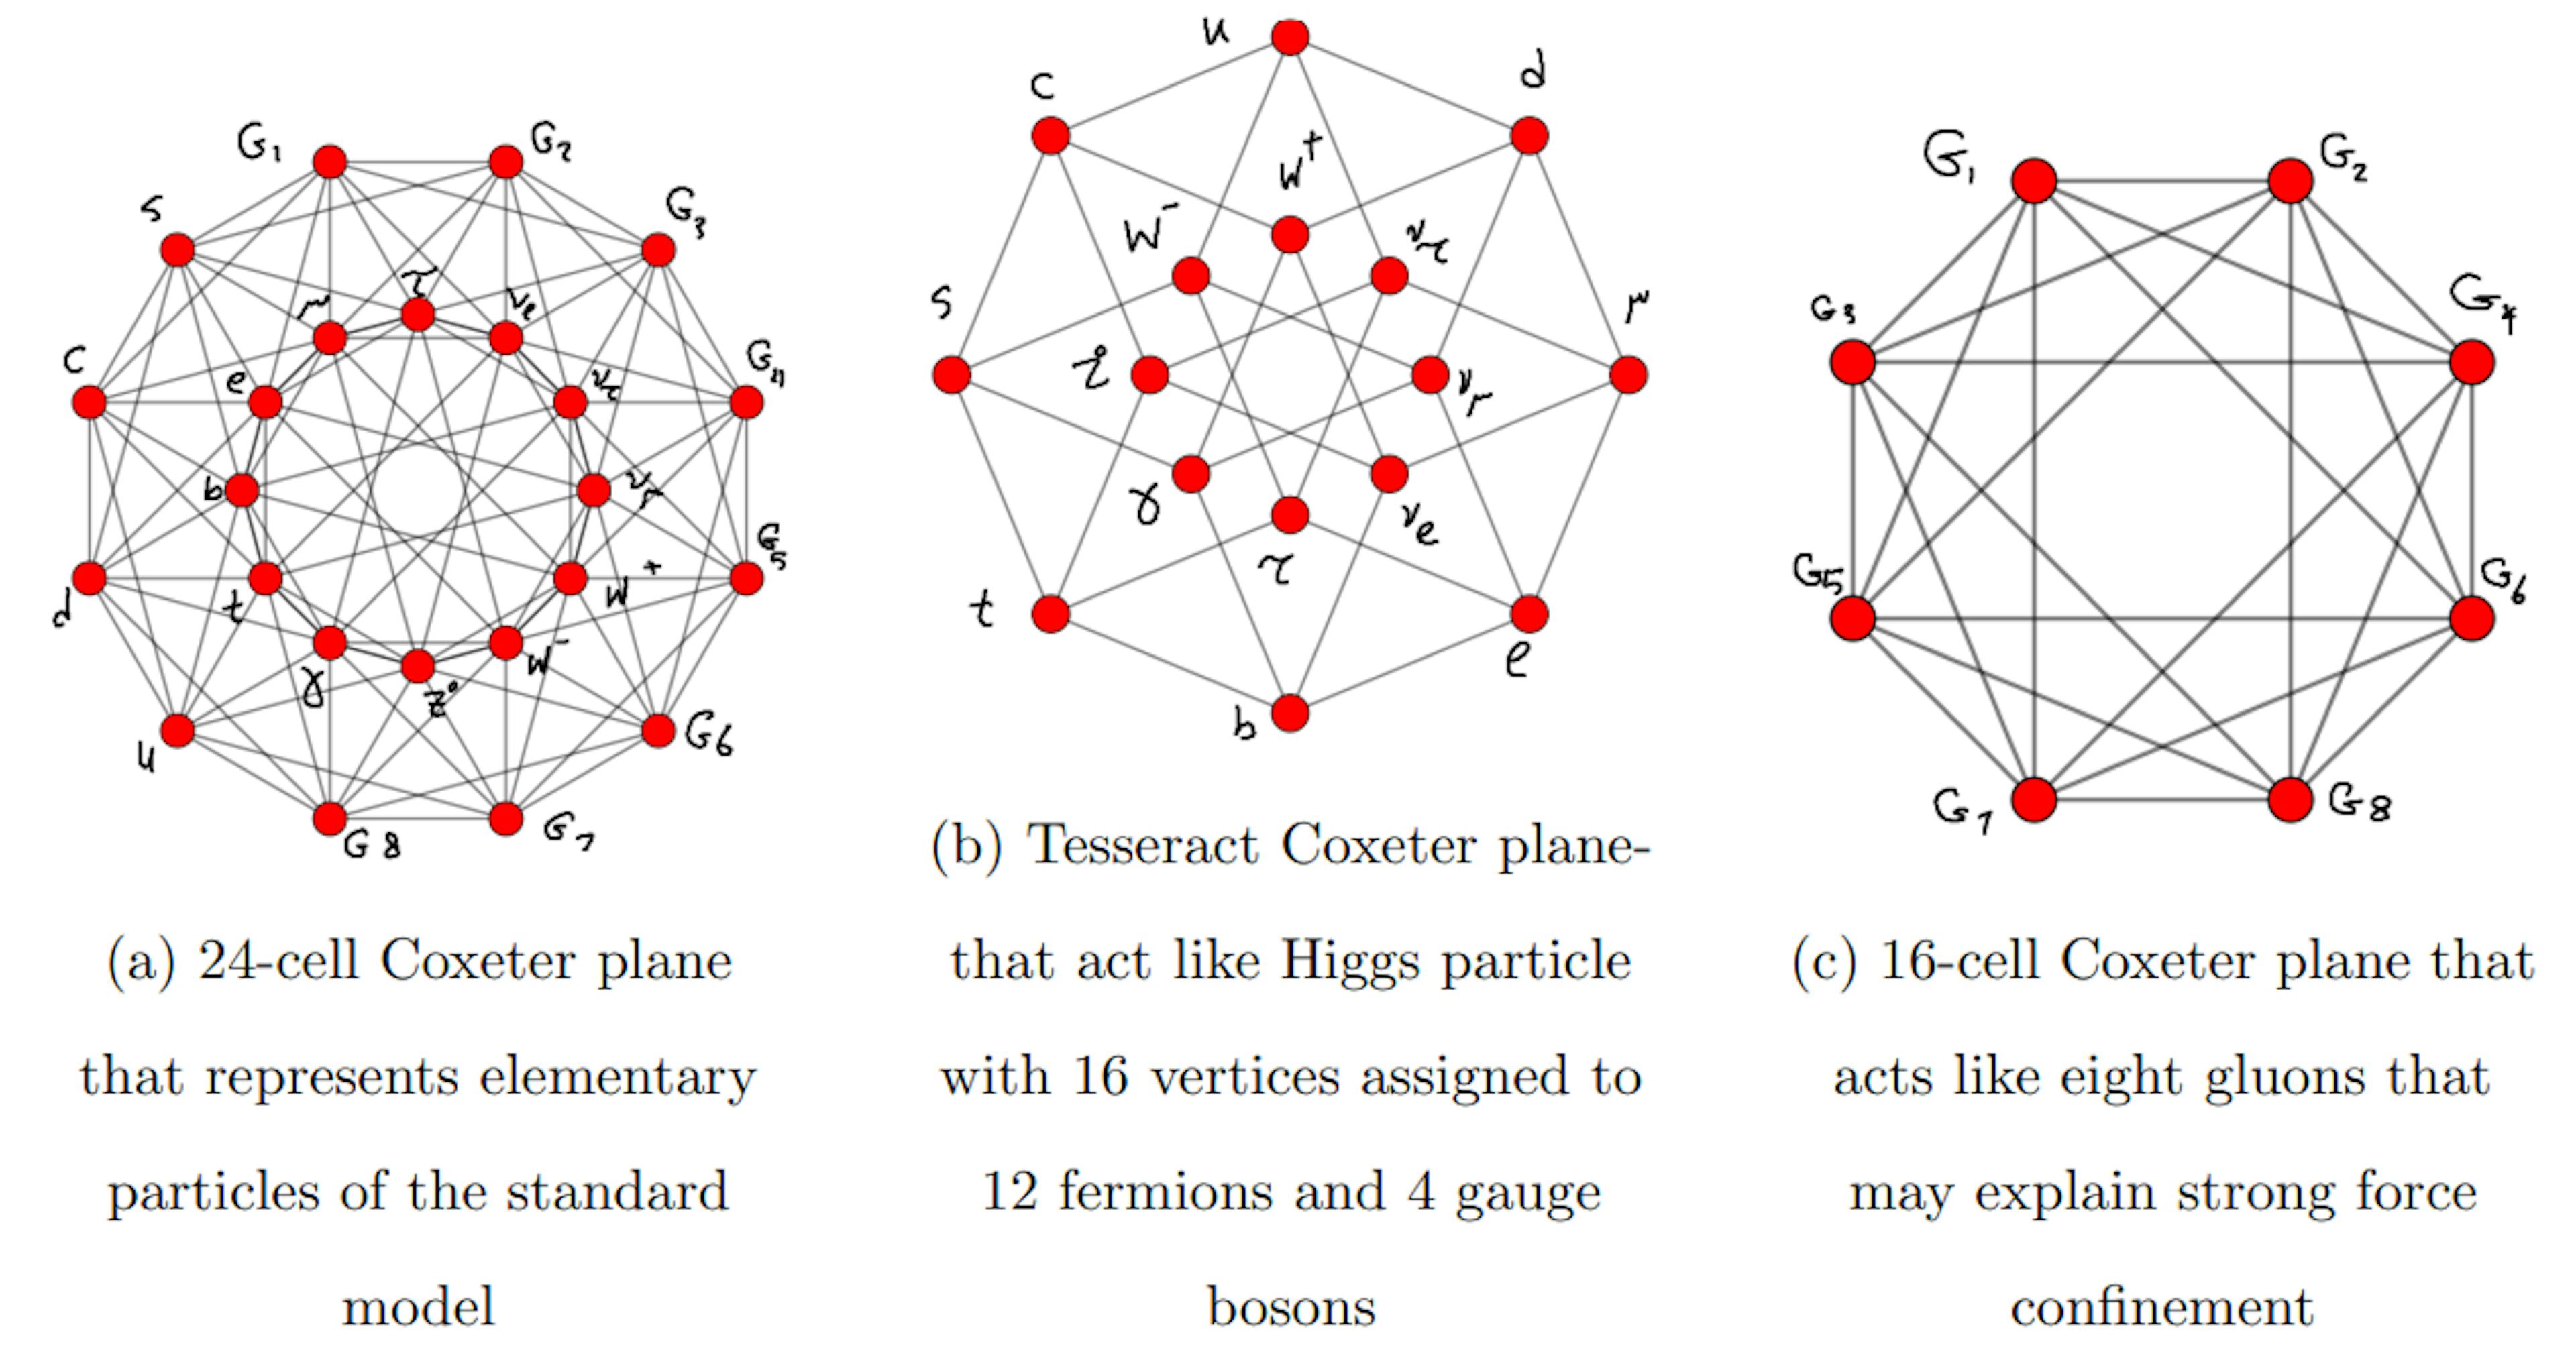 FIG. 2: representation of fundamental particles on vertices of 24-cell, 16-cell and Tesseract